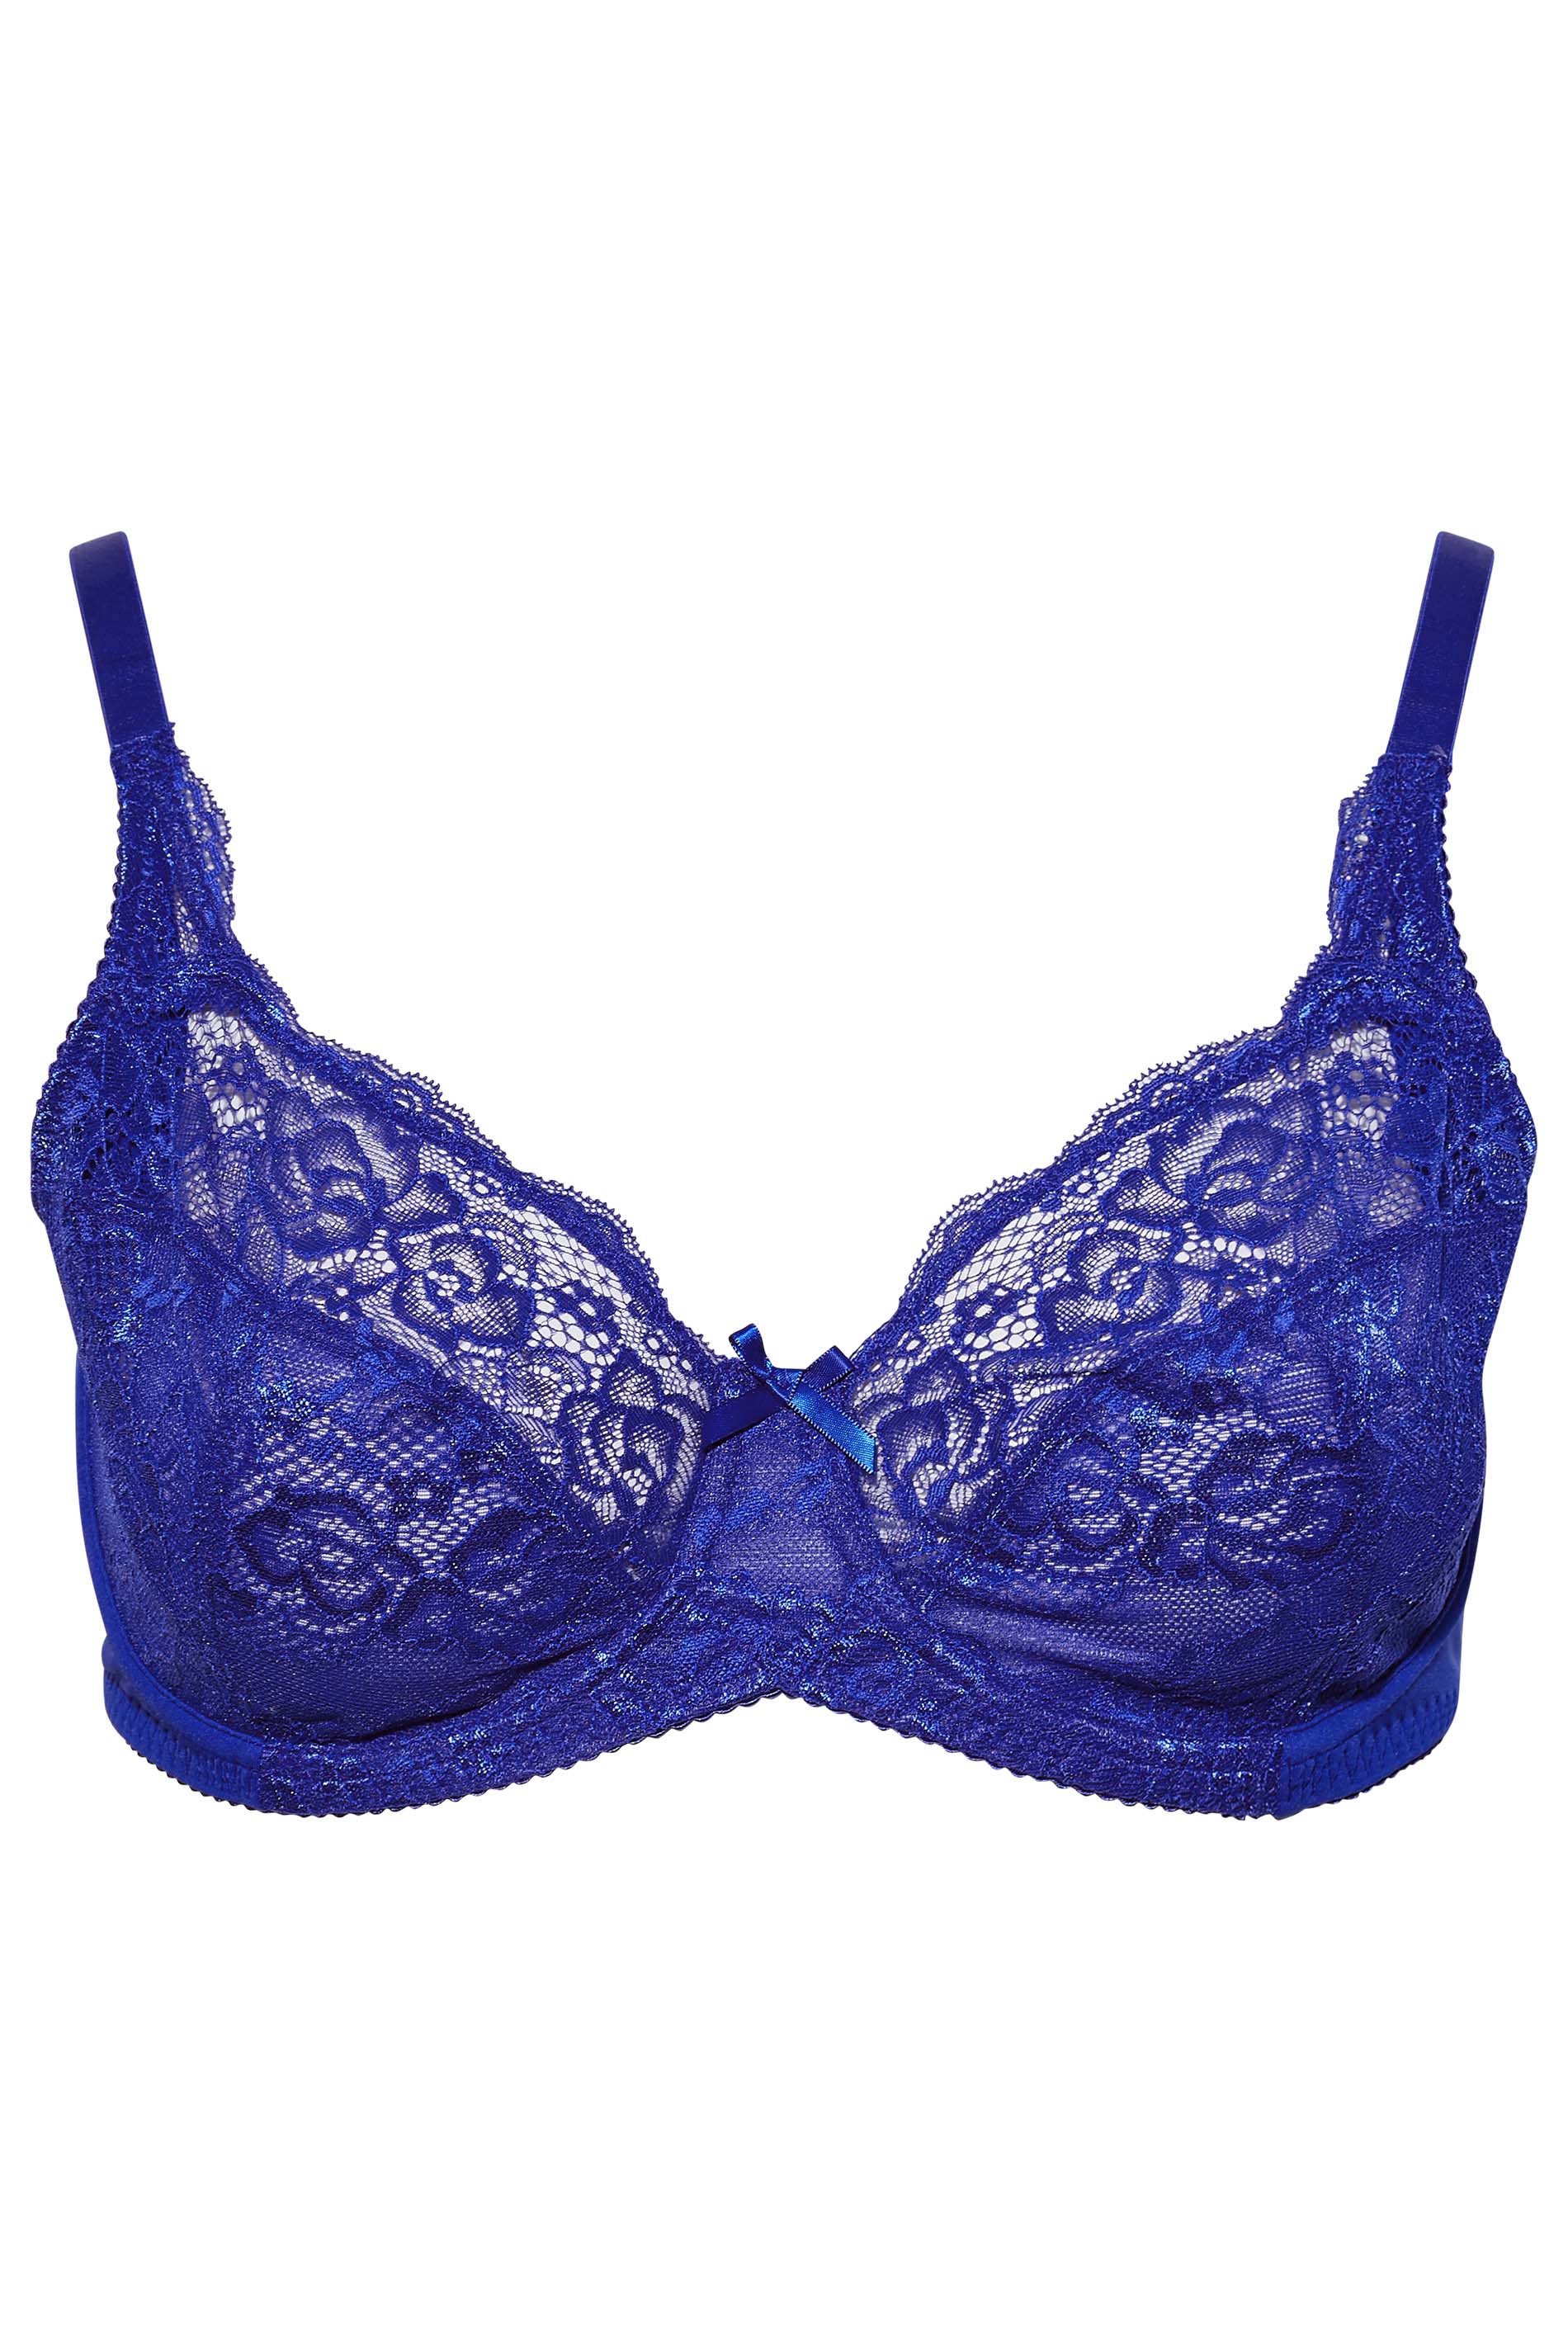 Buy Non-Padded Non-Wired Full Cup Printed Bra in Cobalt Blue